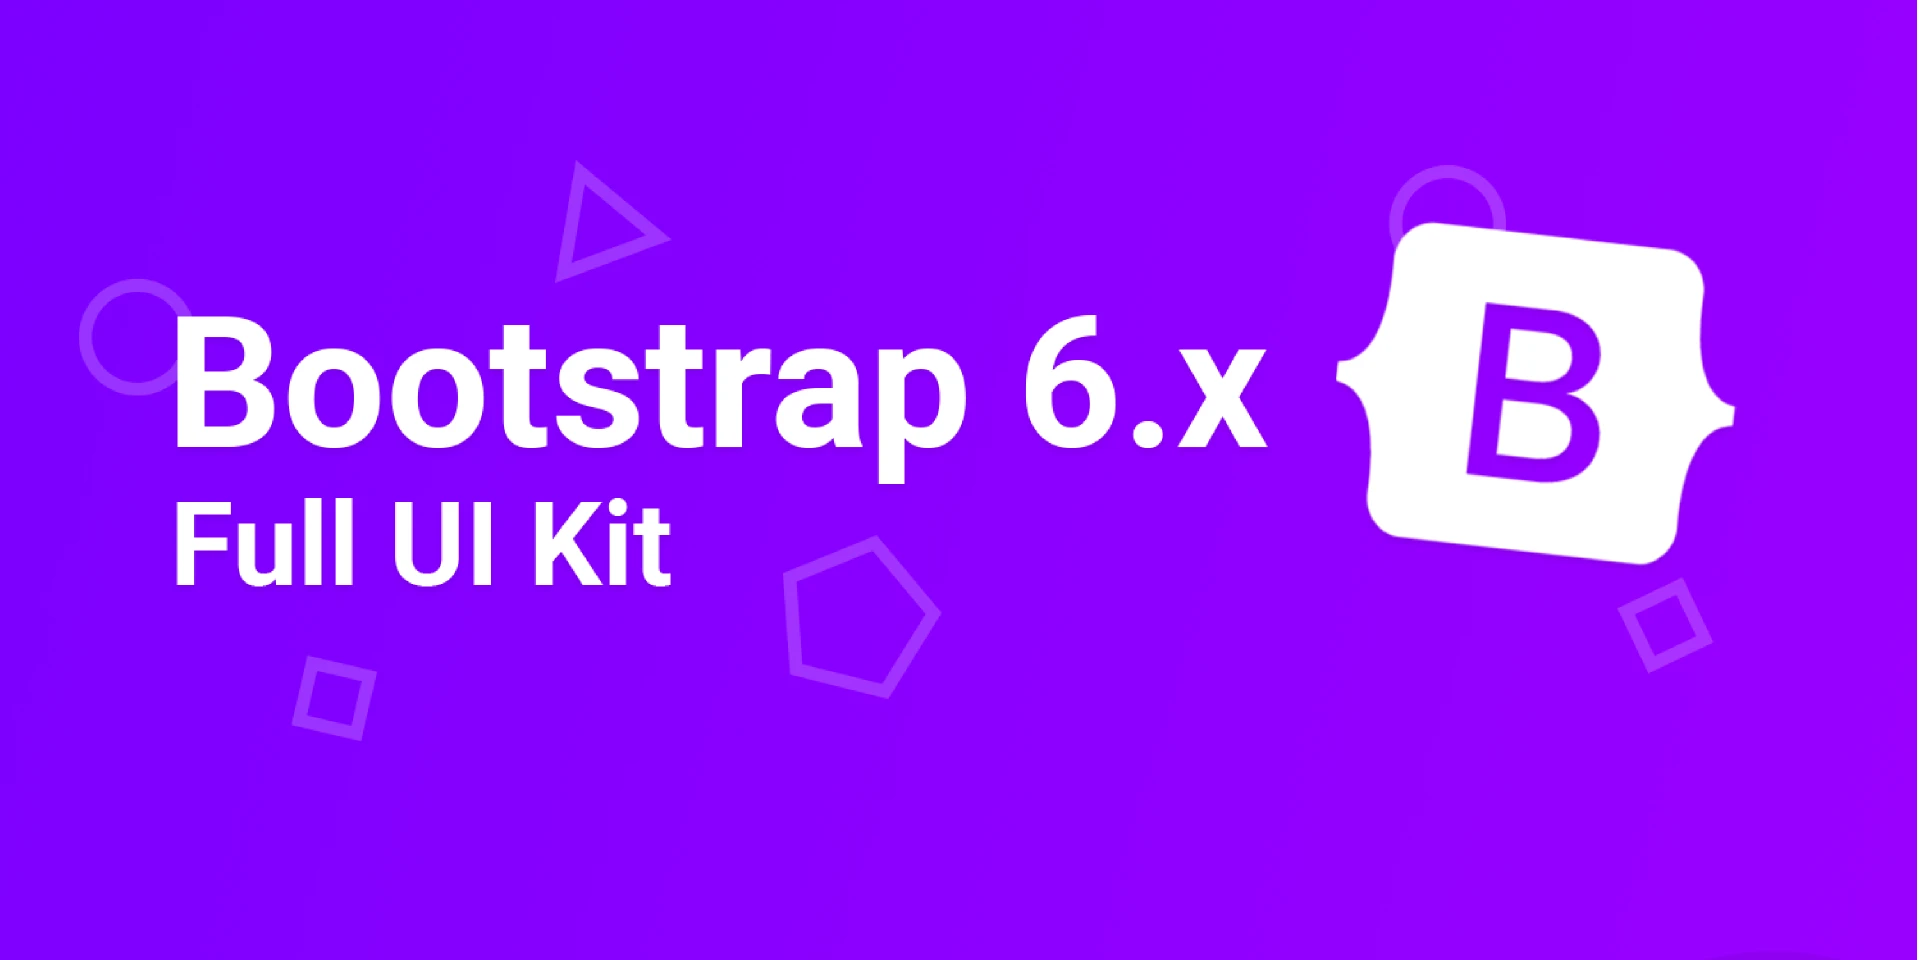 Bootstrap 6.x UI Kit for Figma and Adobe XD